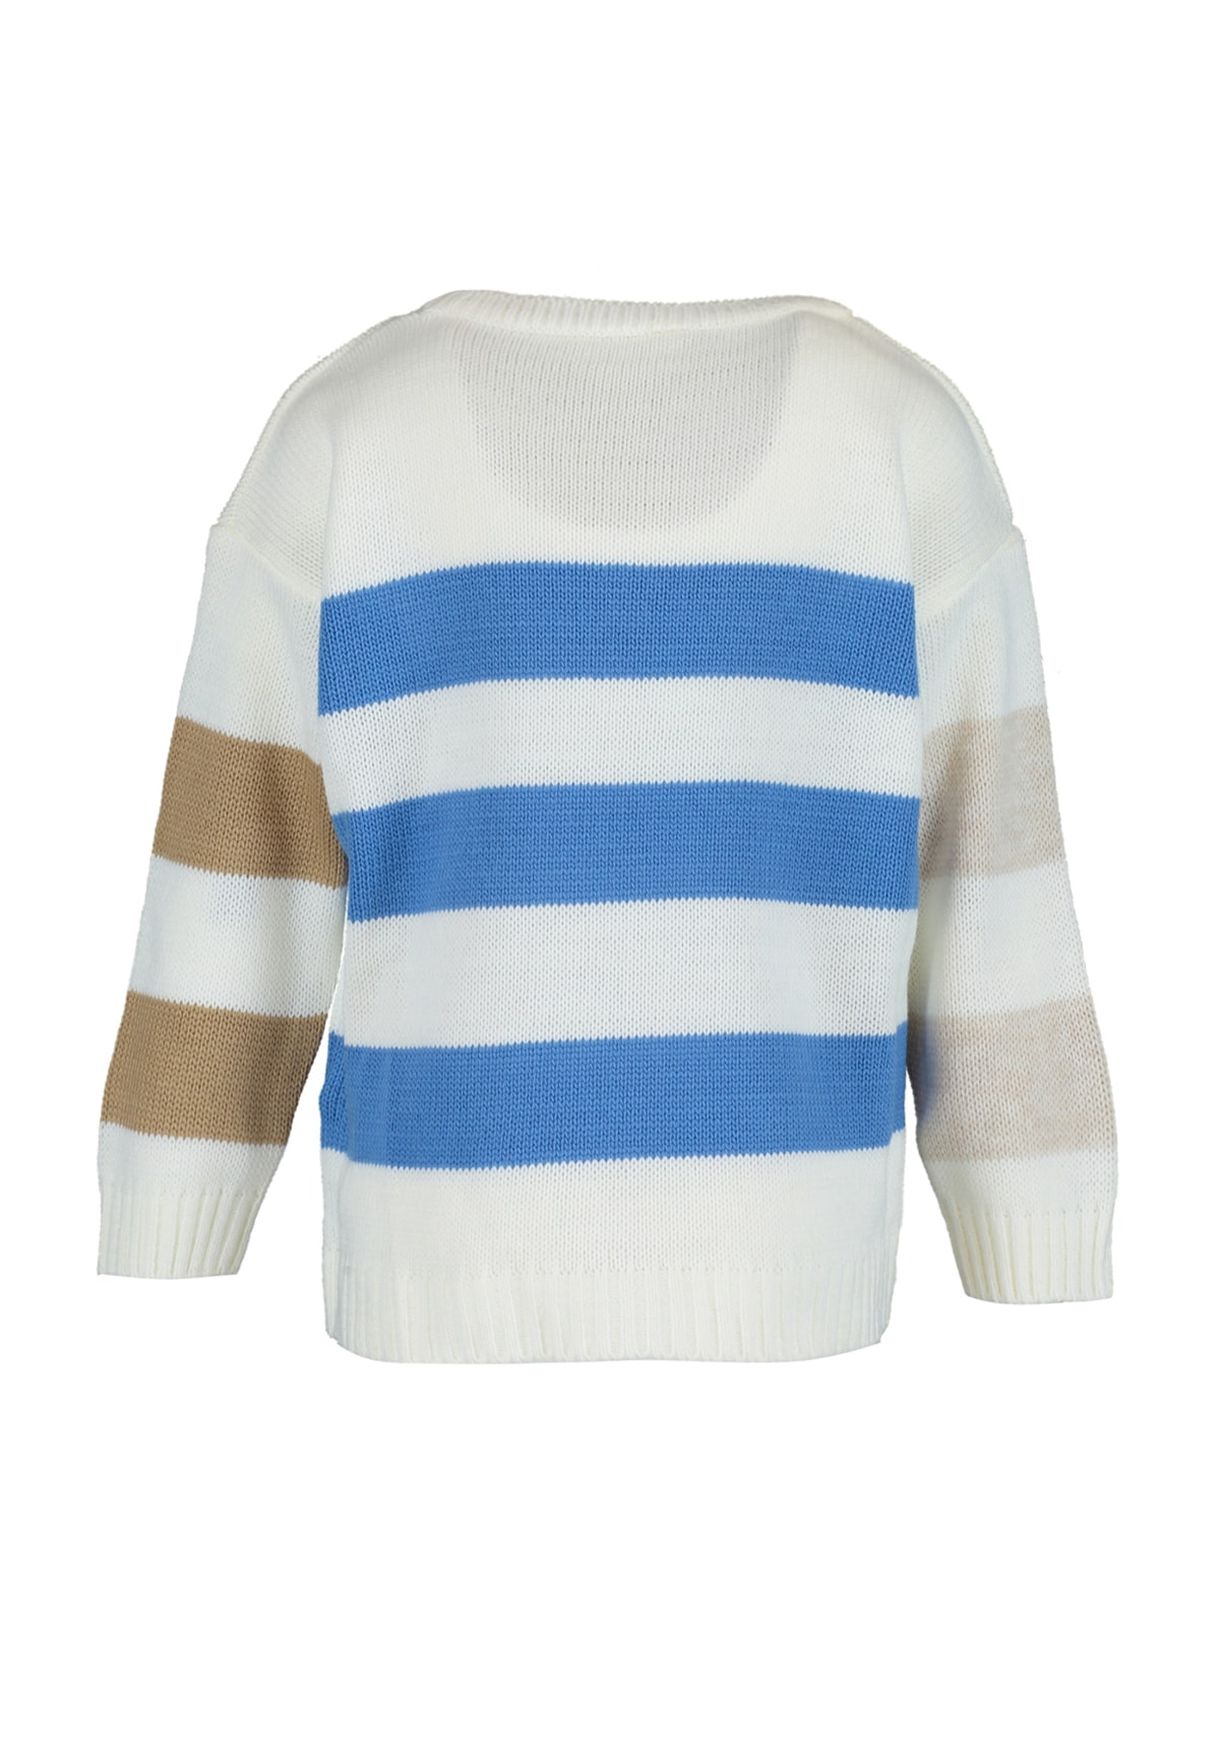 Kids Color Block Knitted Sweater